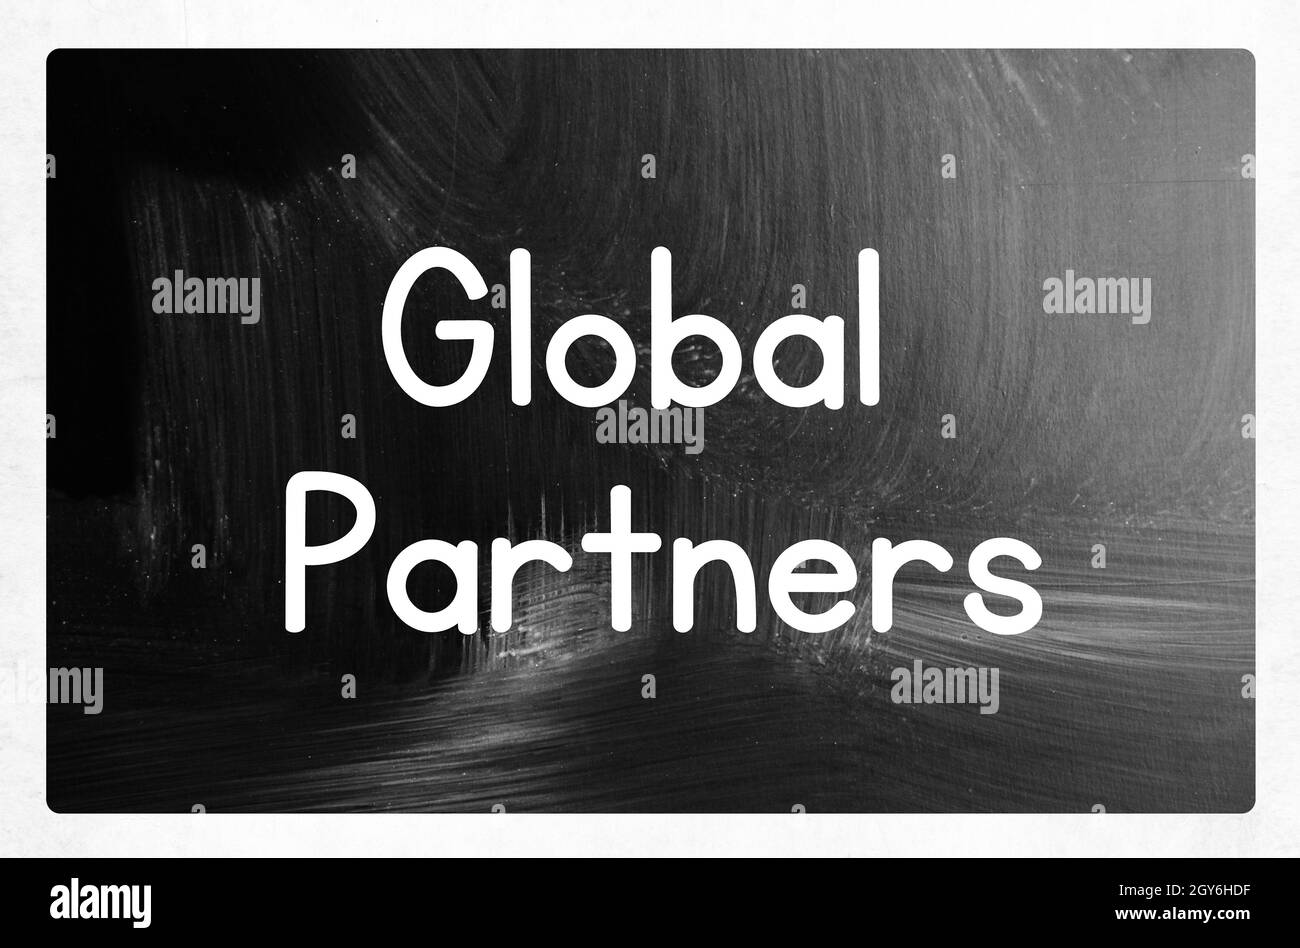 global partners concept Stock Photo